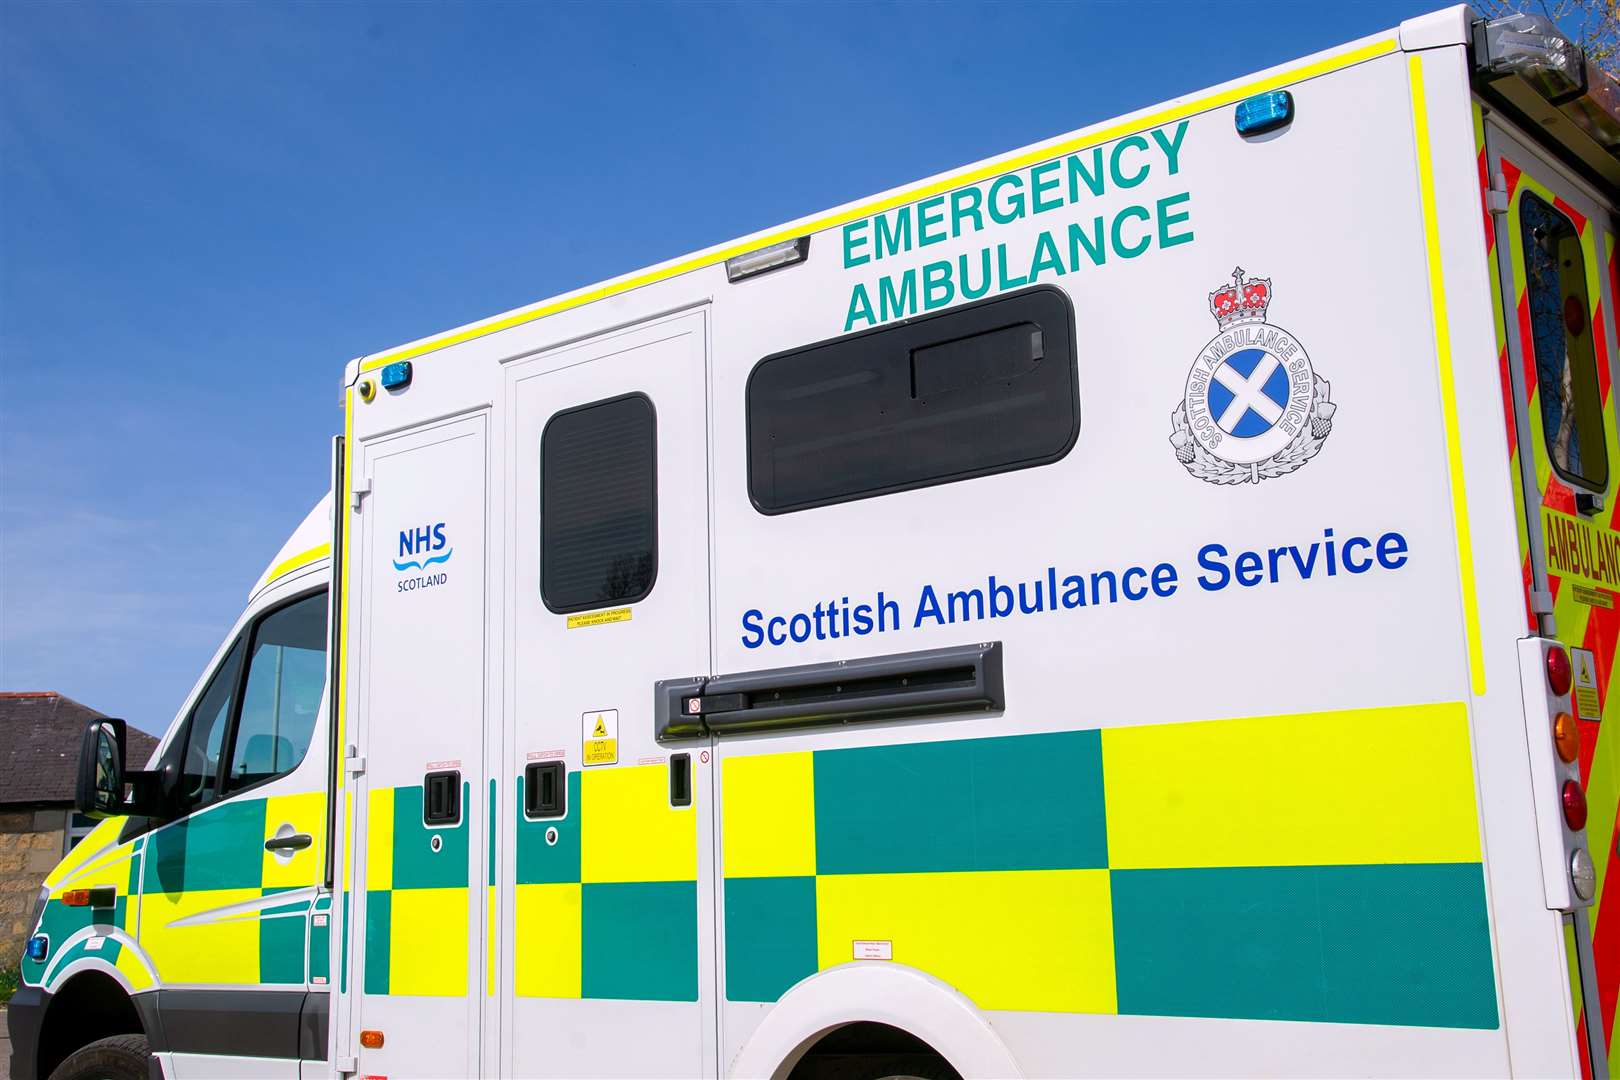 Residents in Banff are waiting almost twice as long for an ambulance as those in other parts of the north-east region.